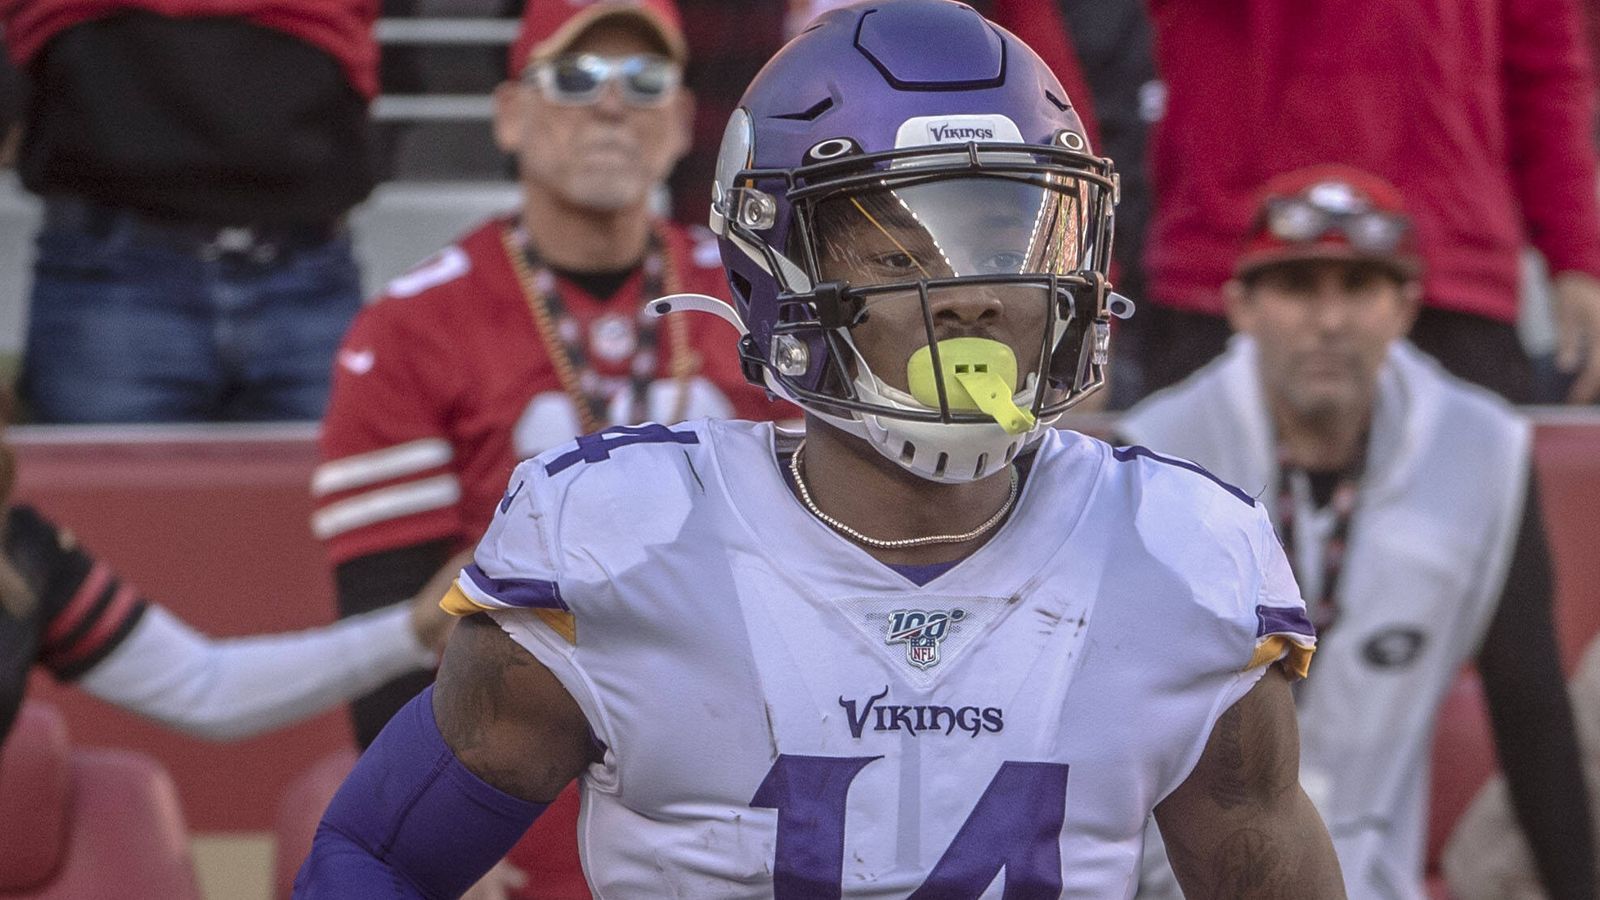 
                <strong>Stefon Diggs (Minnesota Vikings)</strong><br>
                Via Twitter: "Ich stimme mit Nein."
              